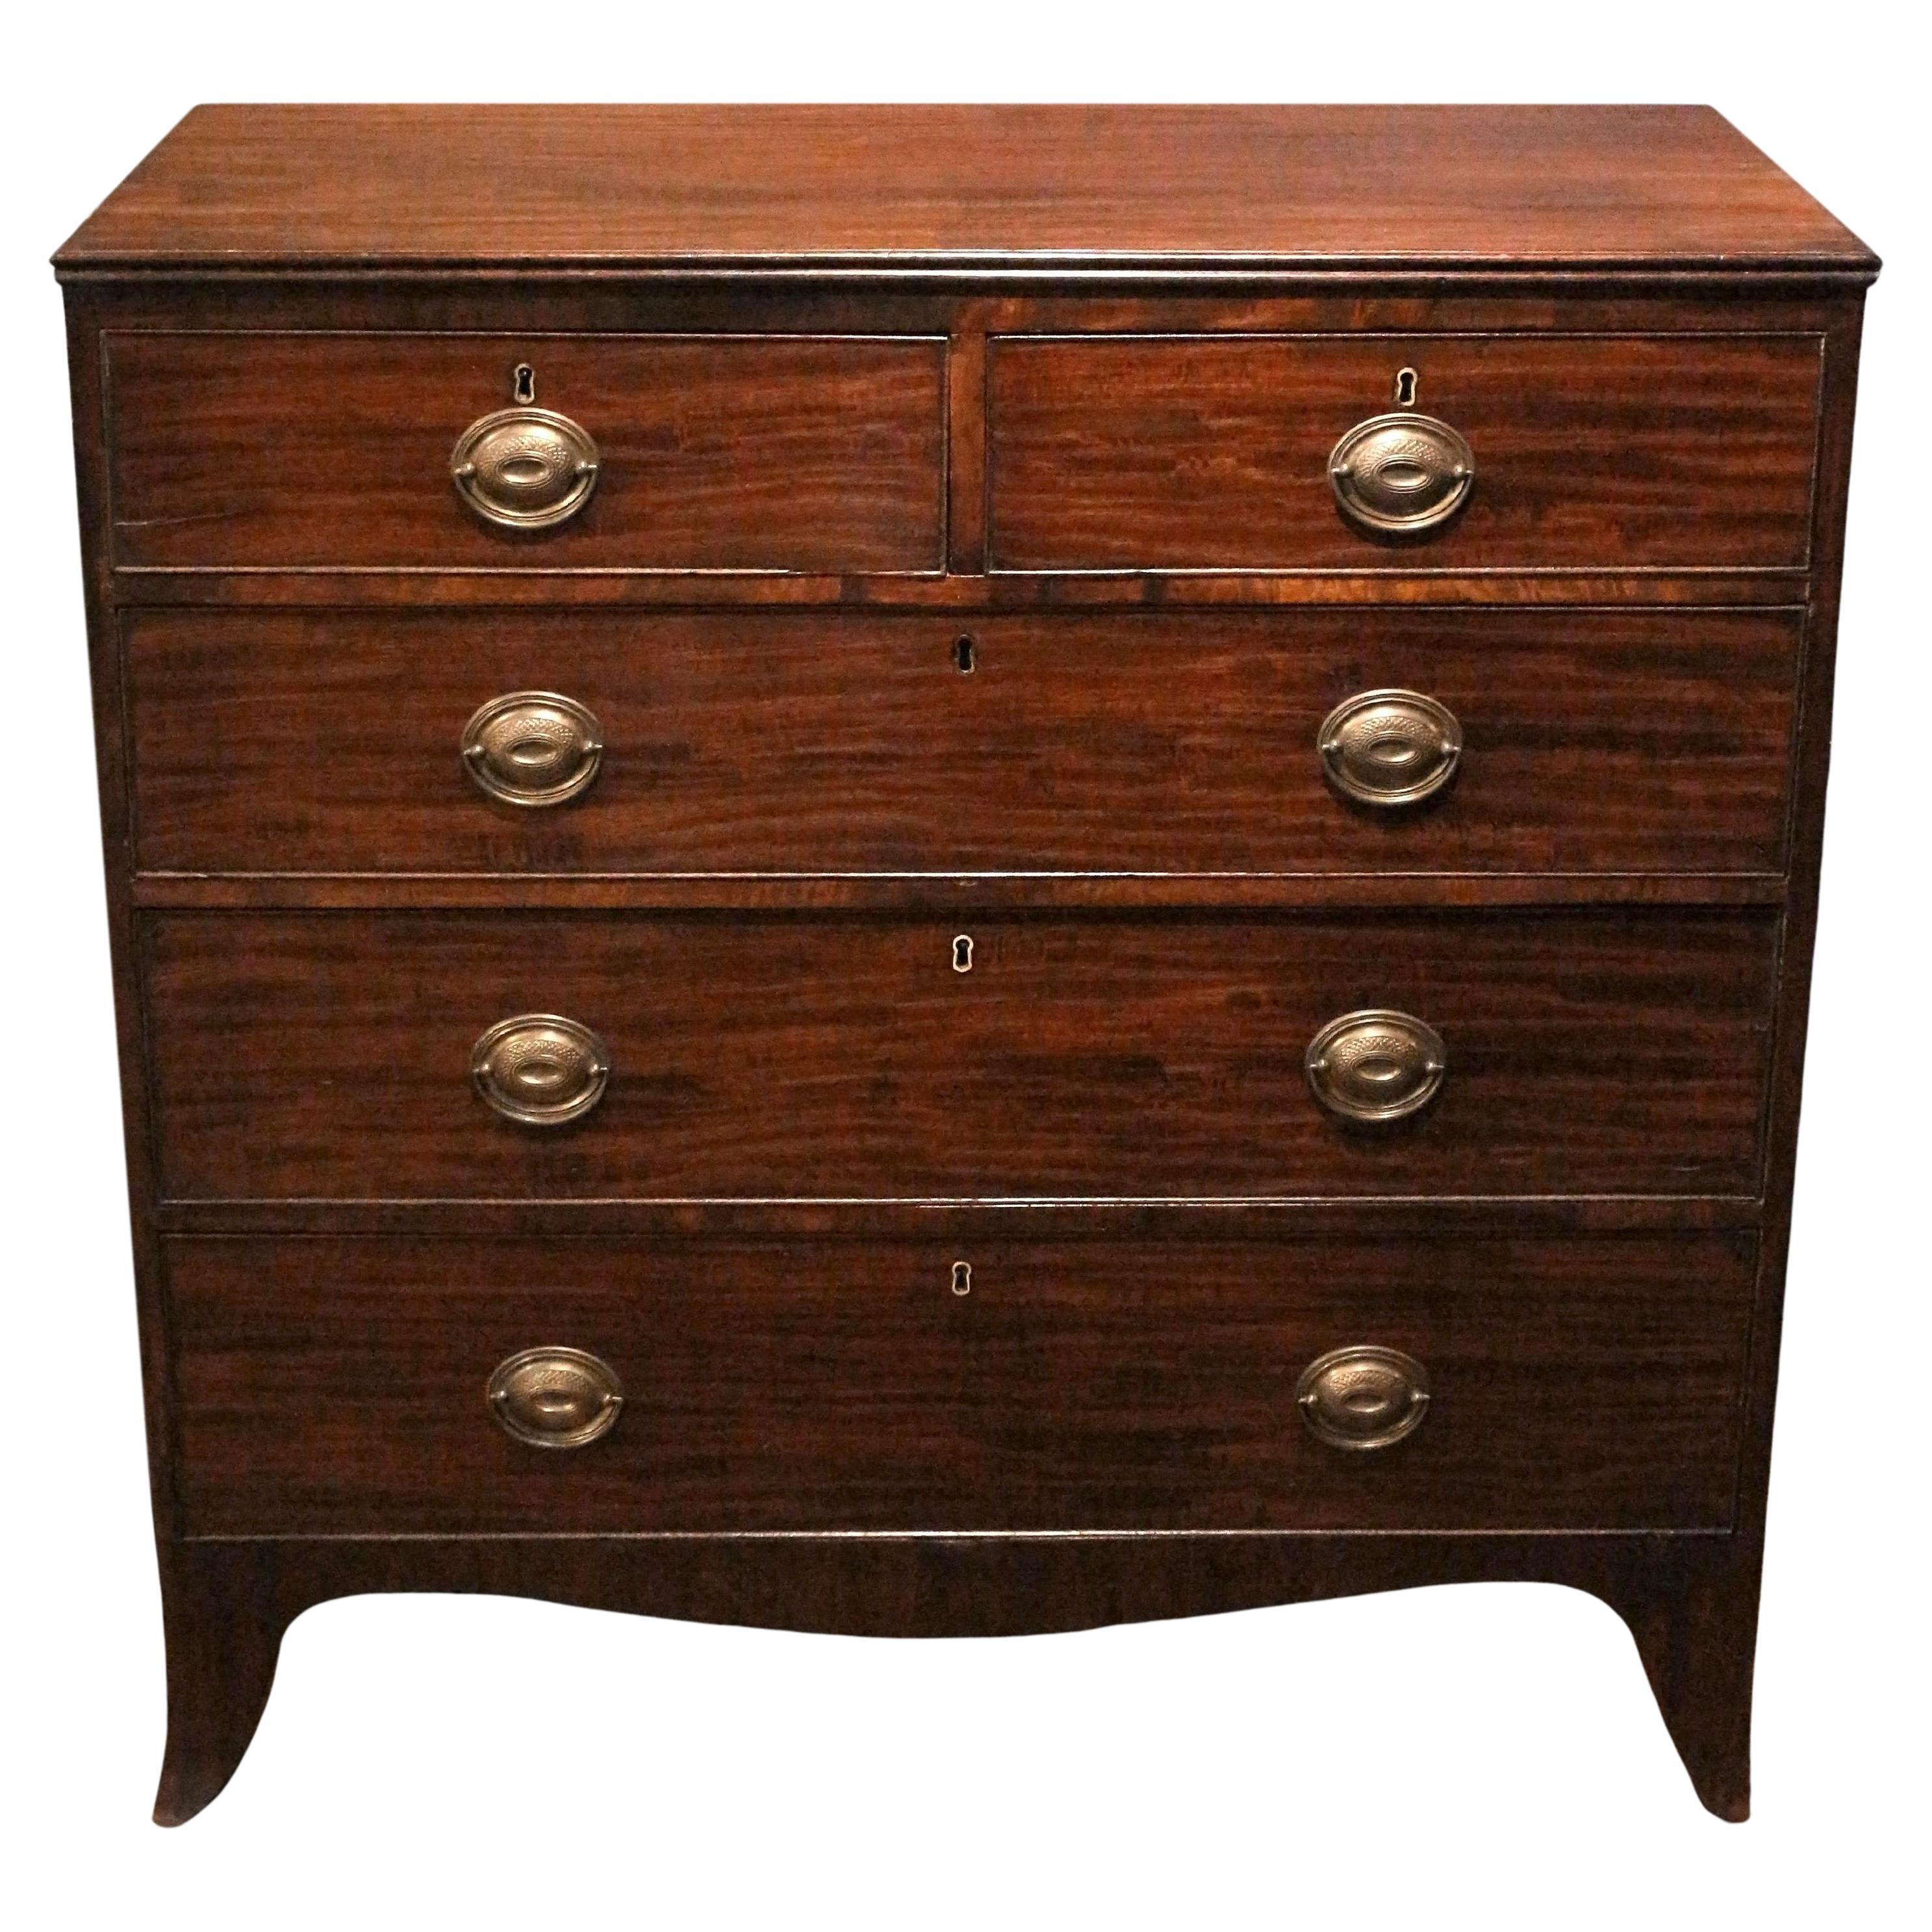 Circa 1800 Anglais George III Period Chest of Drawers en vente